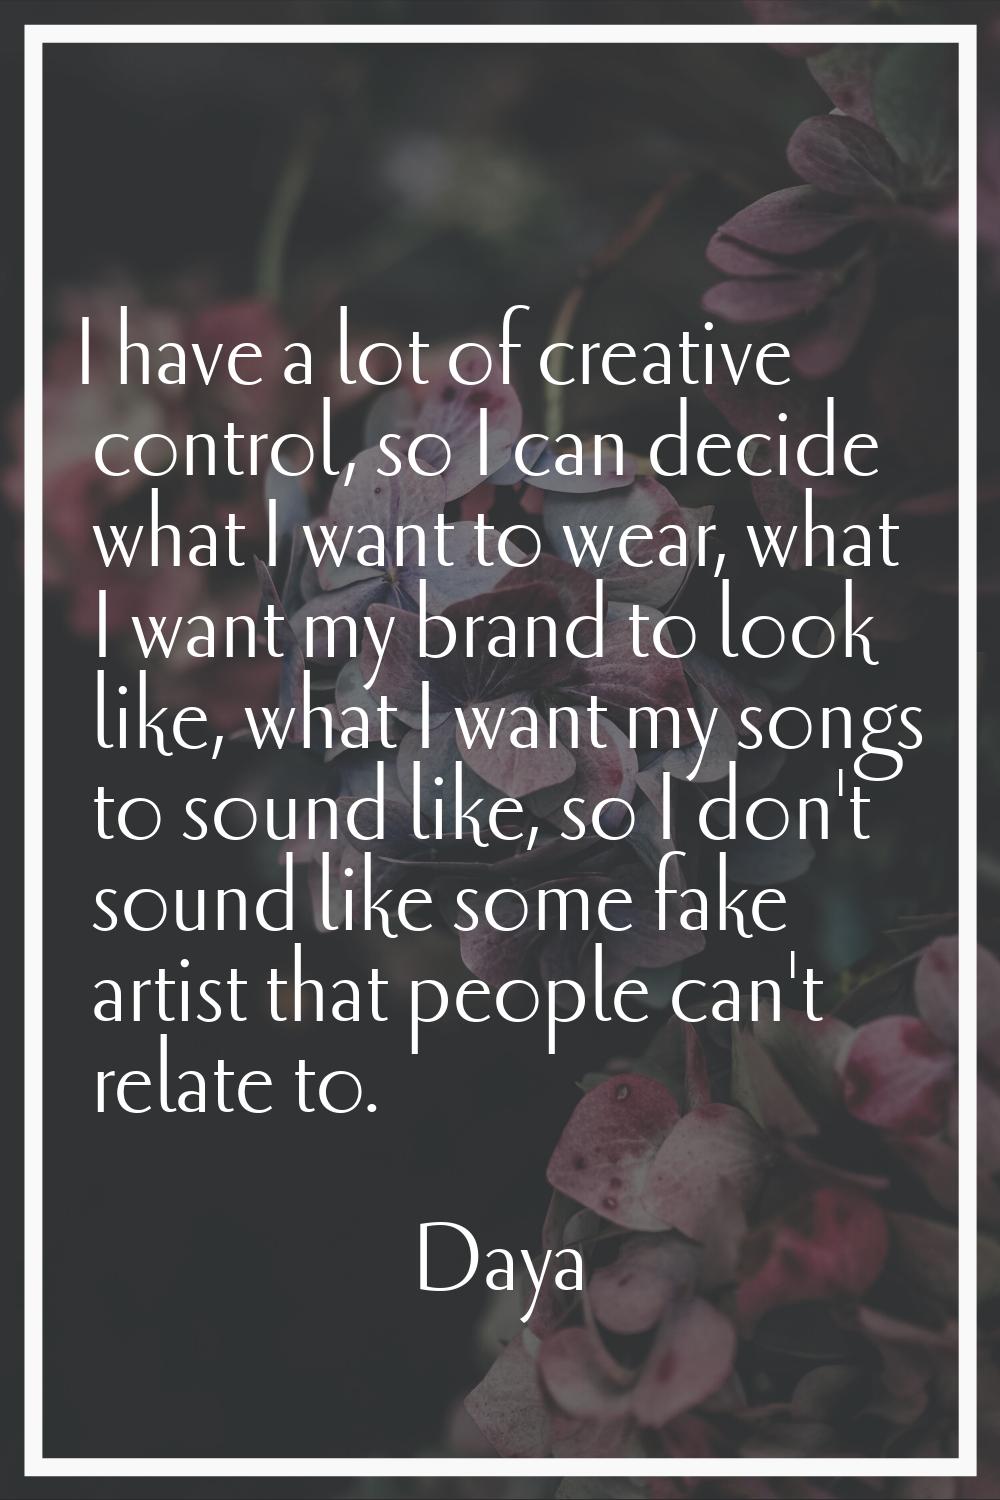 I have a lot of creative control, so I can decide what I want to wear, what I want my brand to look